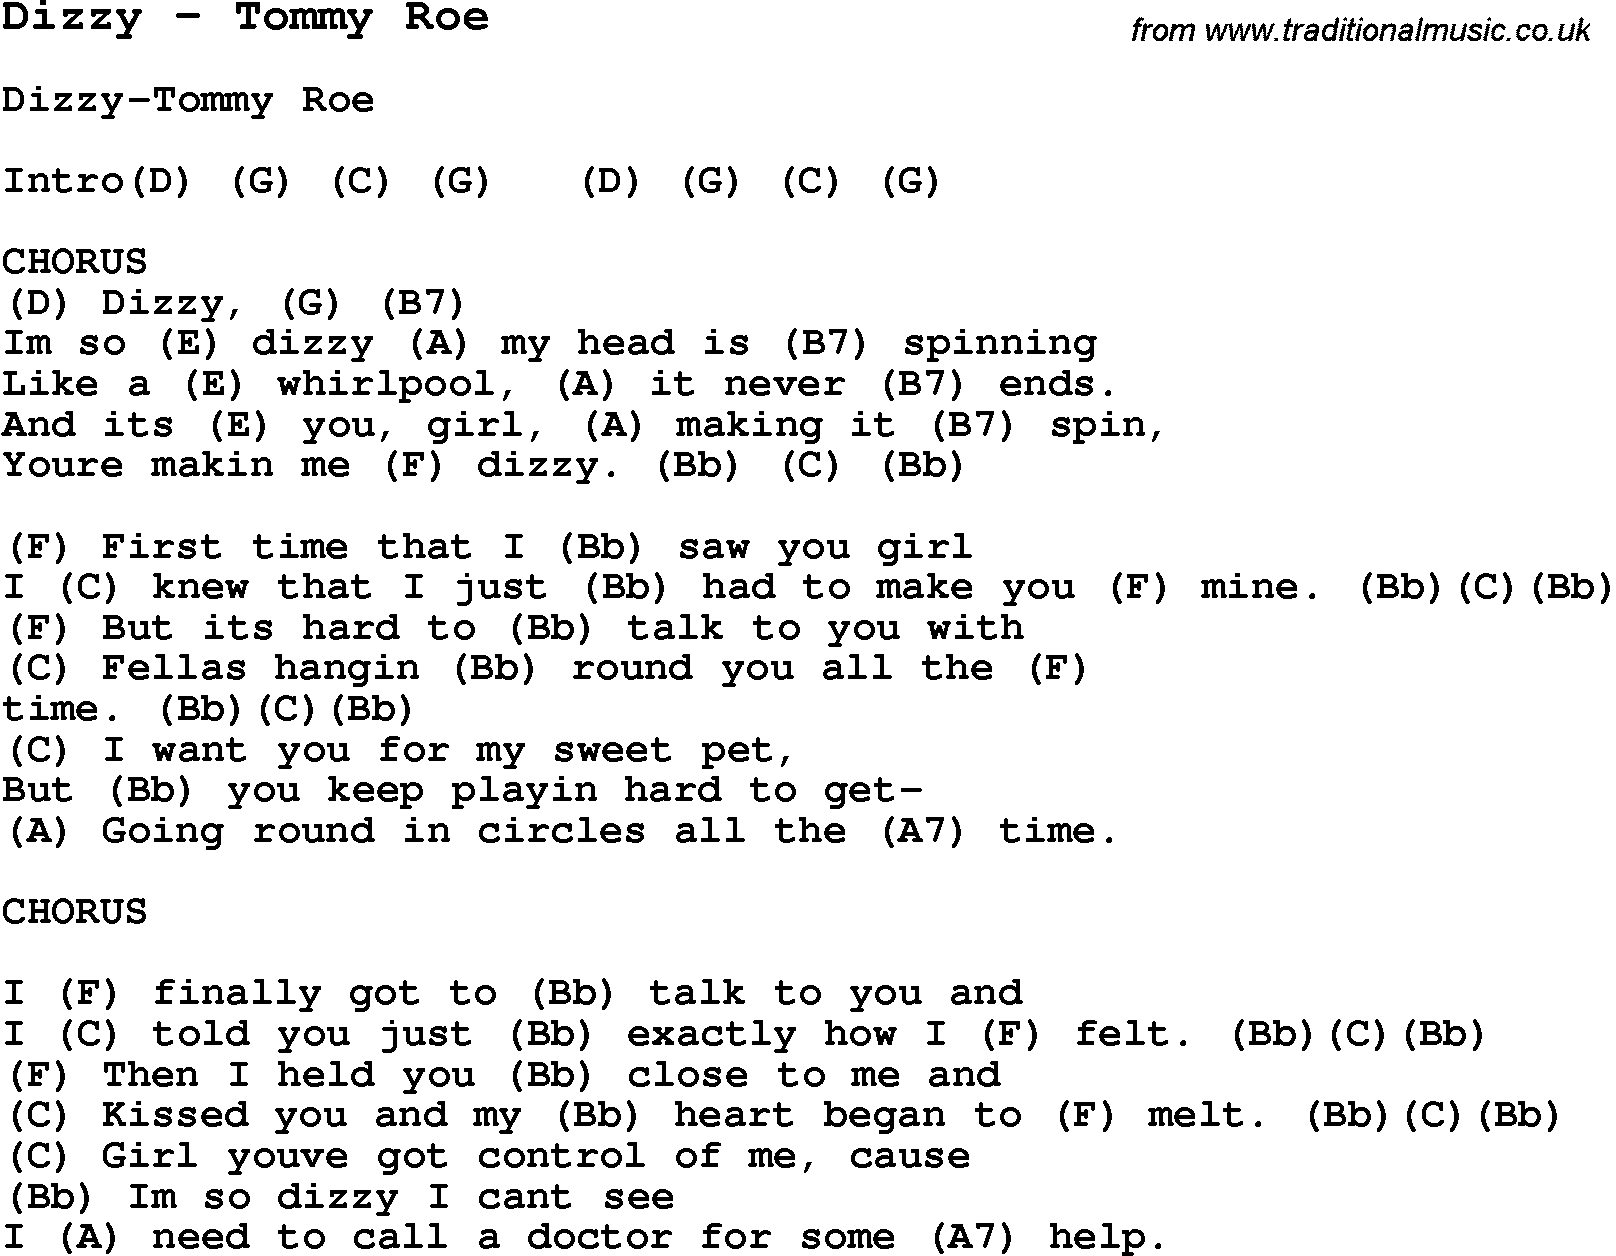 Song Dizzy by Tommy Roe, with lyrics for vocal performance and accompaniment chords for Ukulele, Guitar Banjo etc.